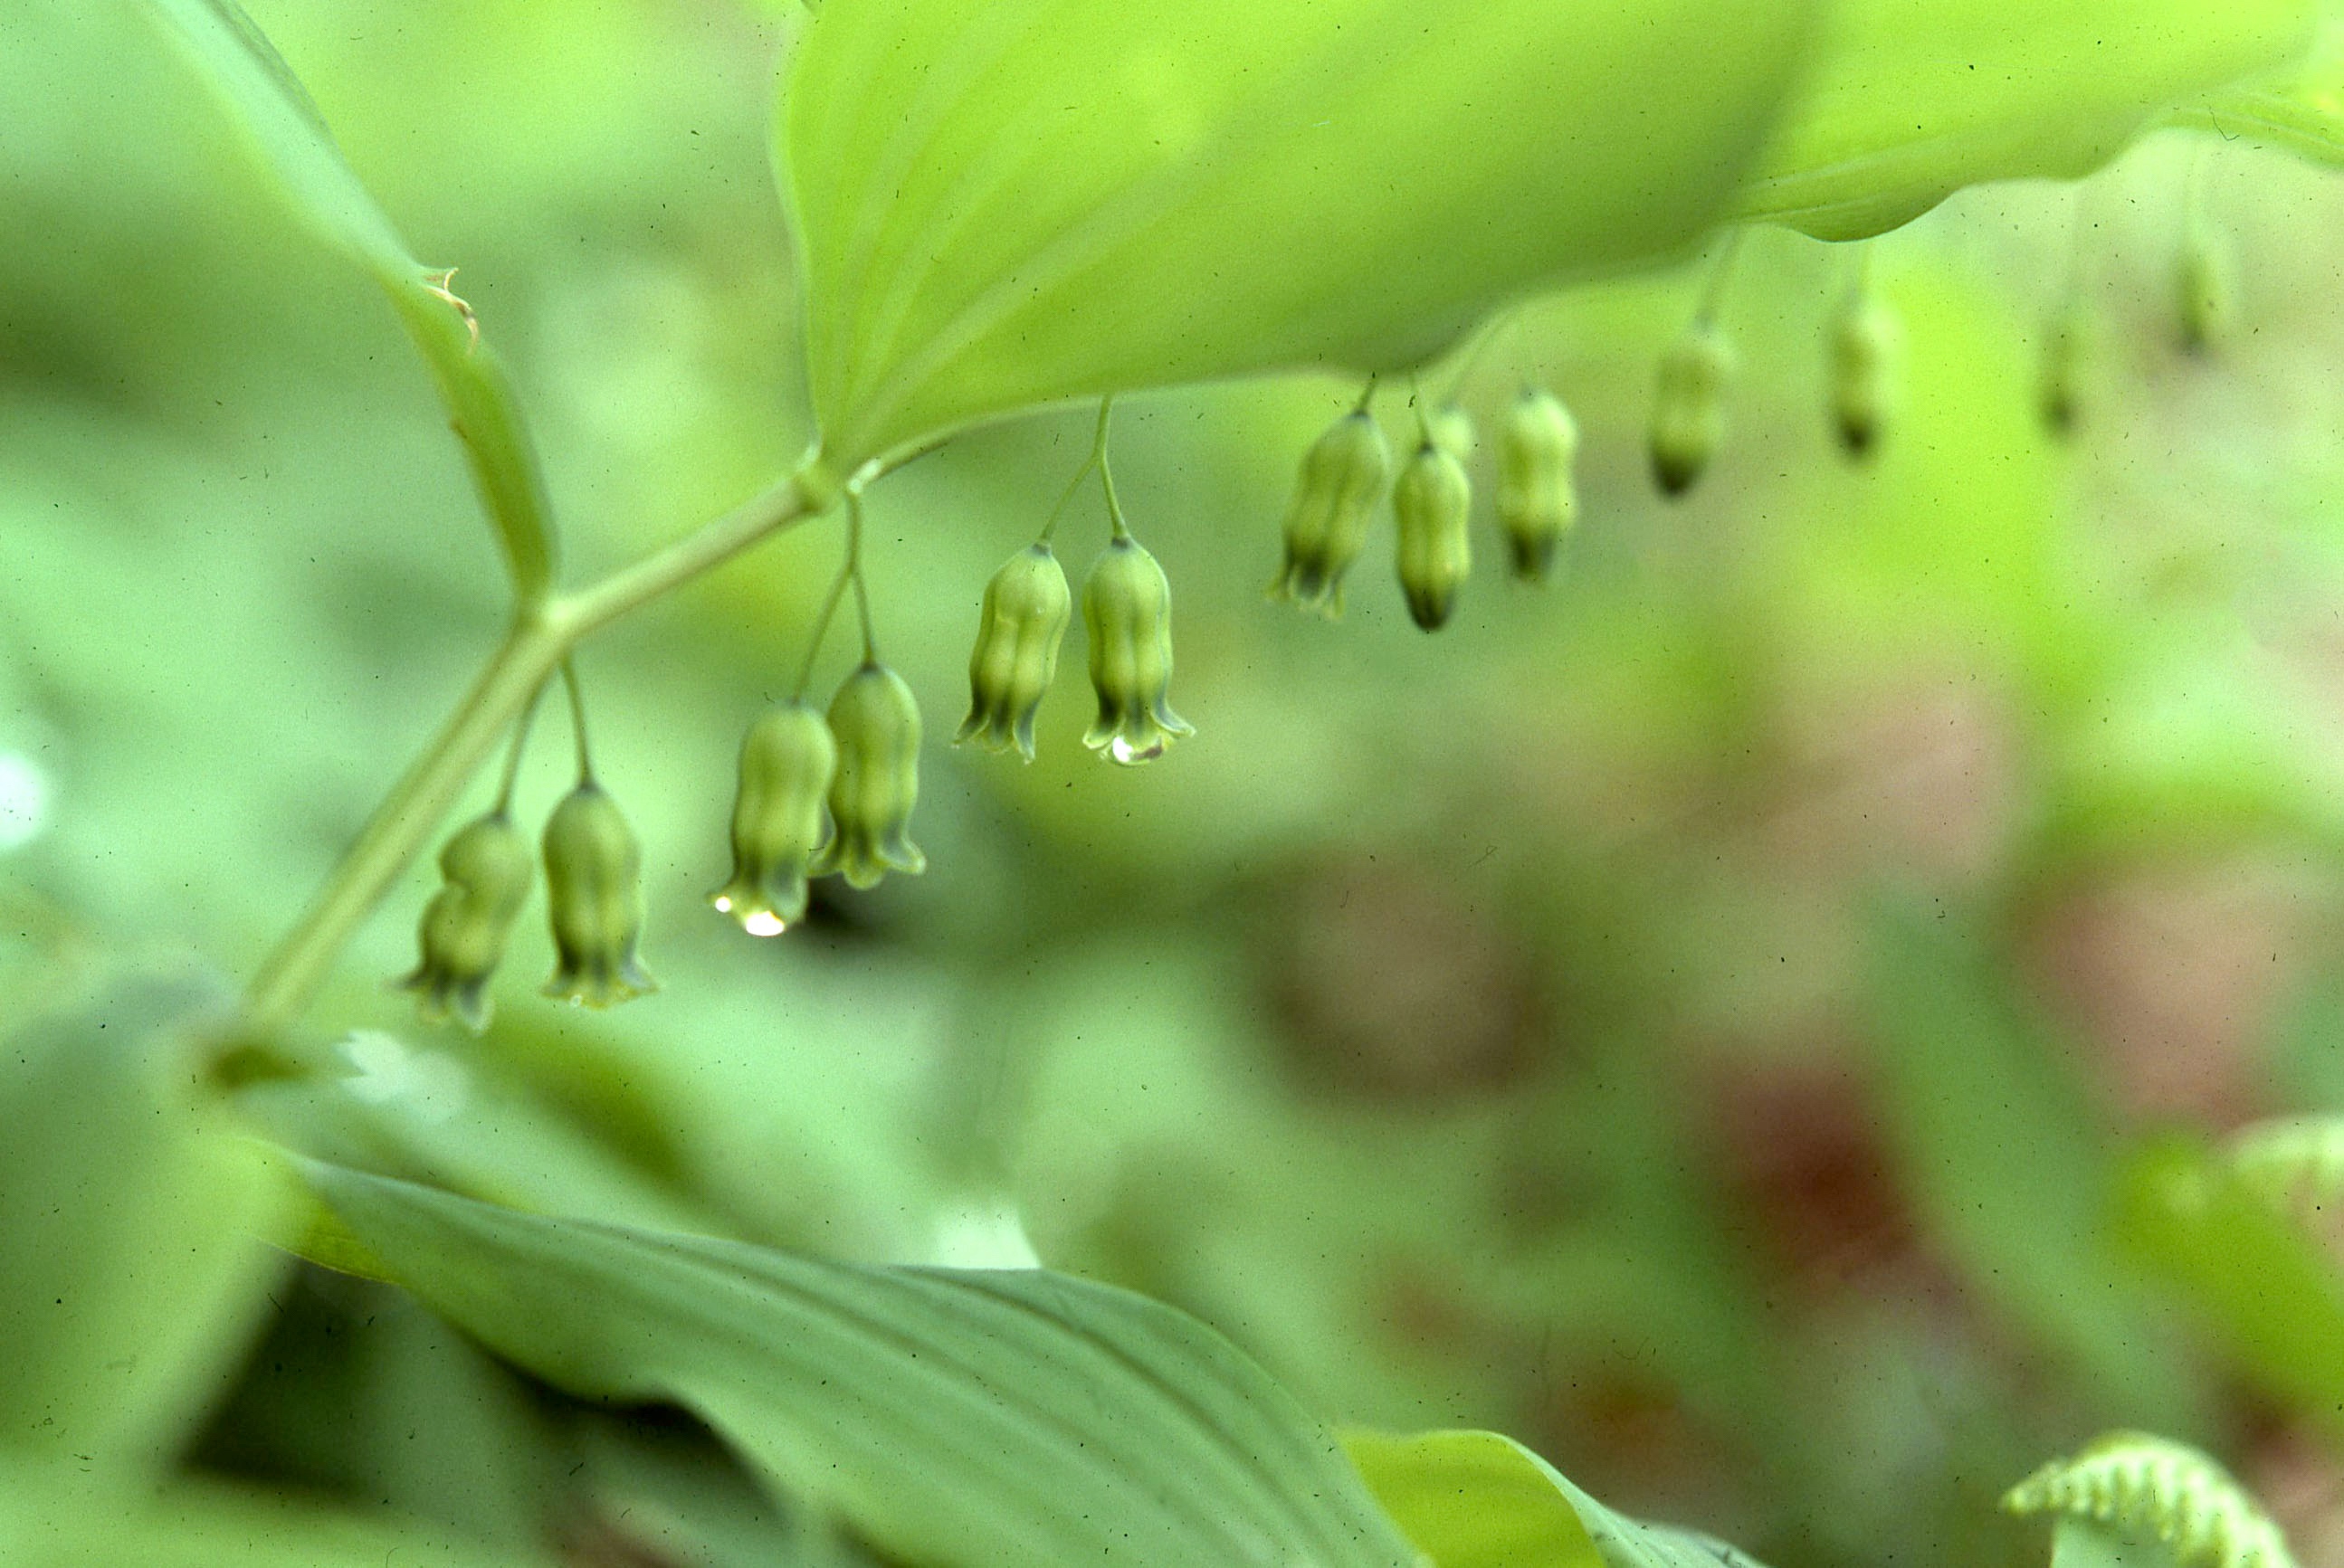 The Scientific Name is Polygonatum pubescens. You will likely hear them called Hairy Solomon's-seal, Downy Solomon's-seal. This picture shows the Downy Solomon's-seal has small (up to 1/2